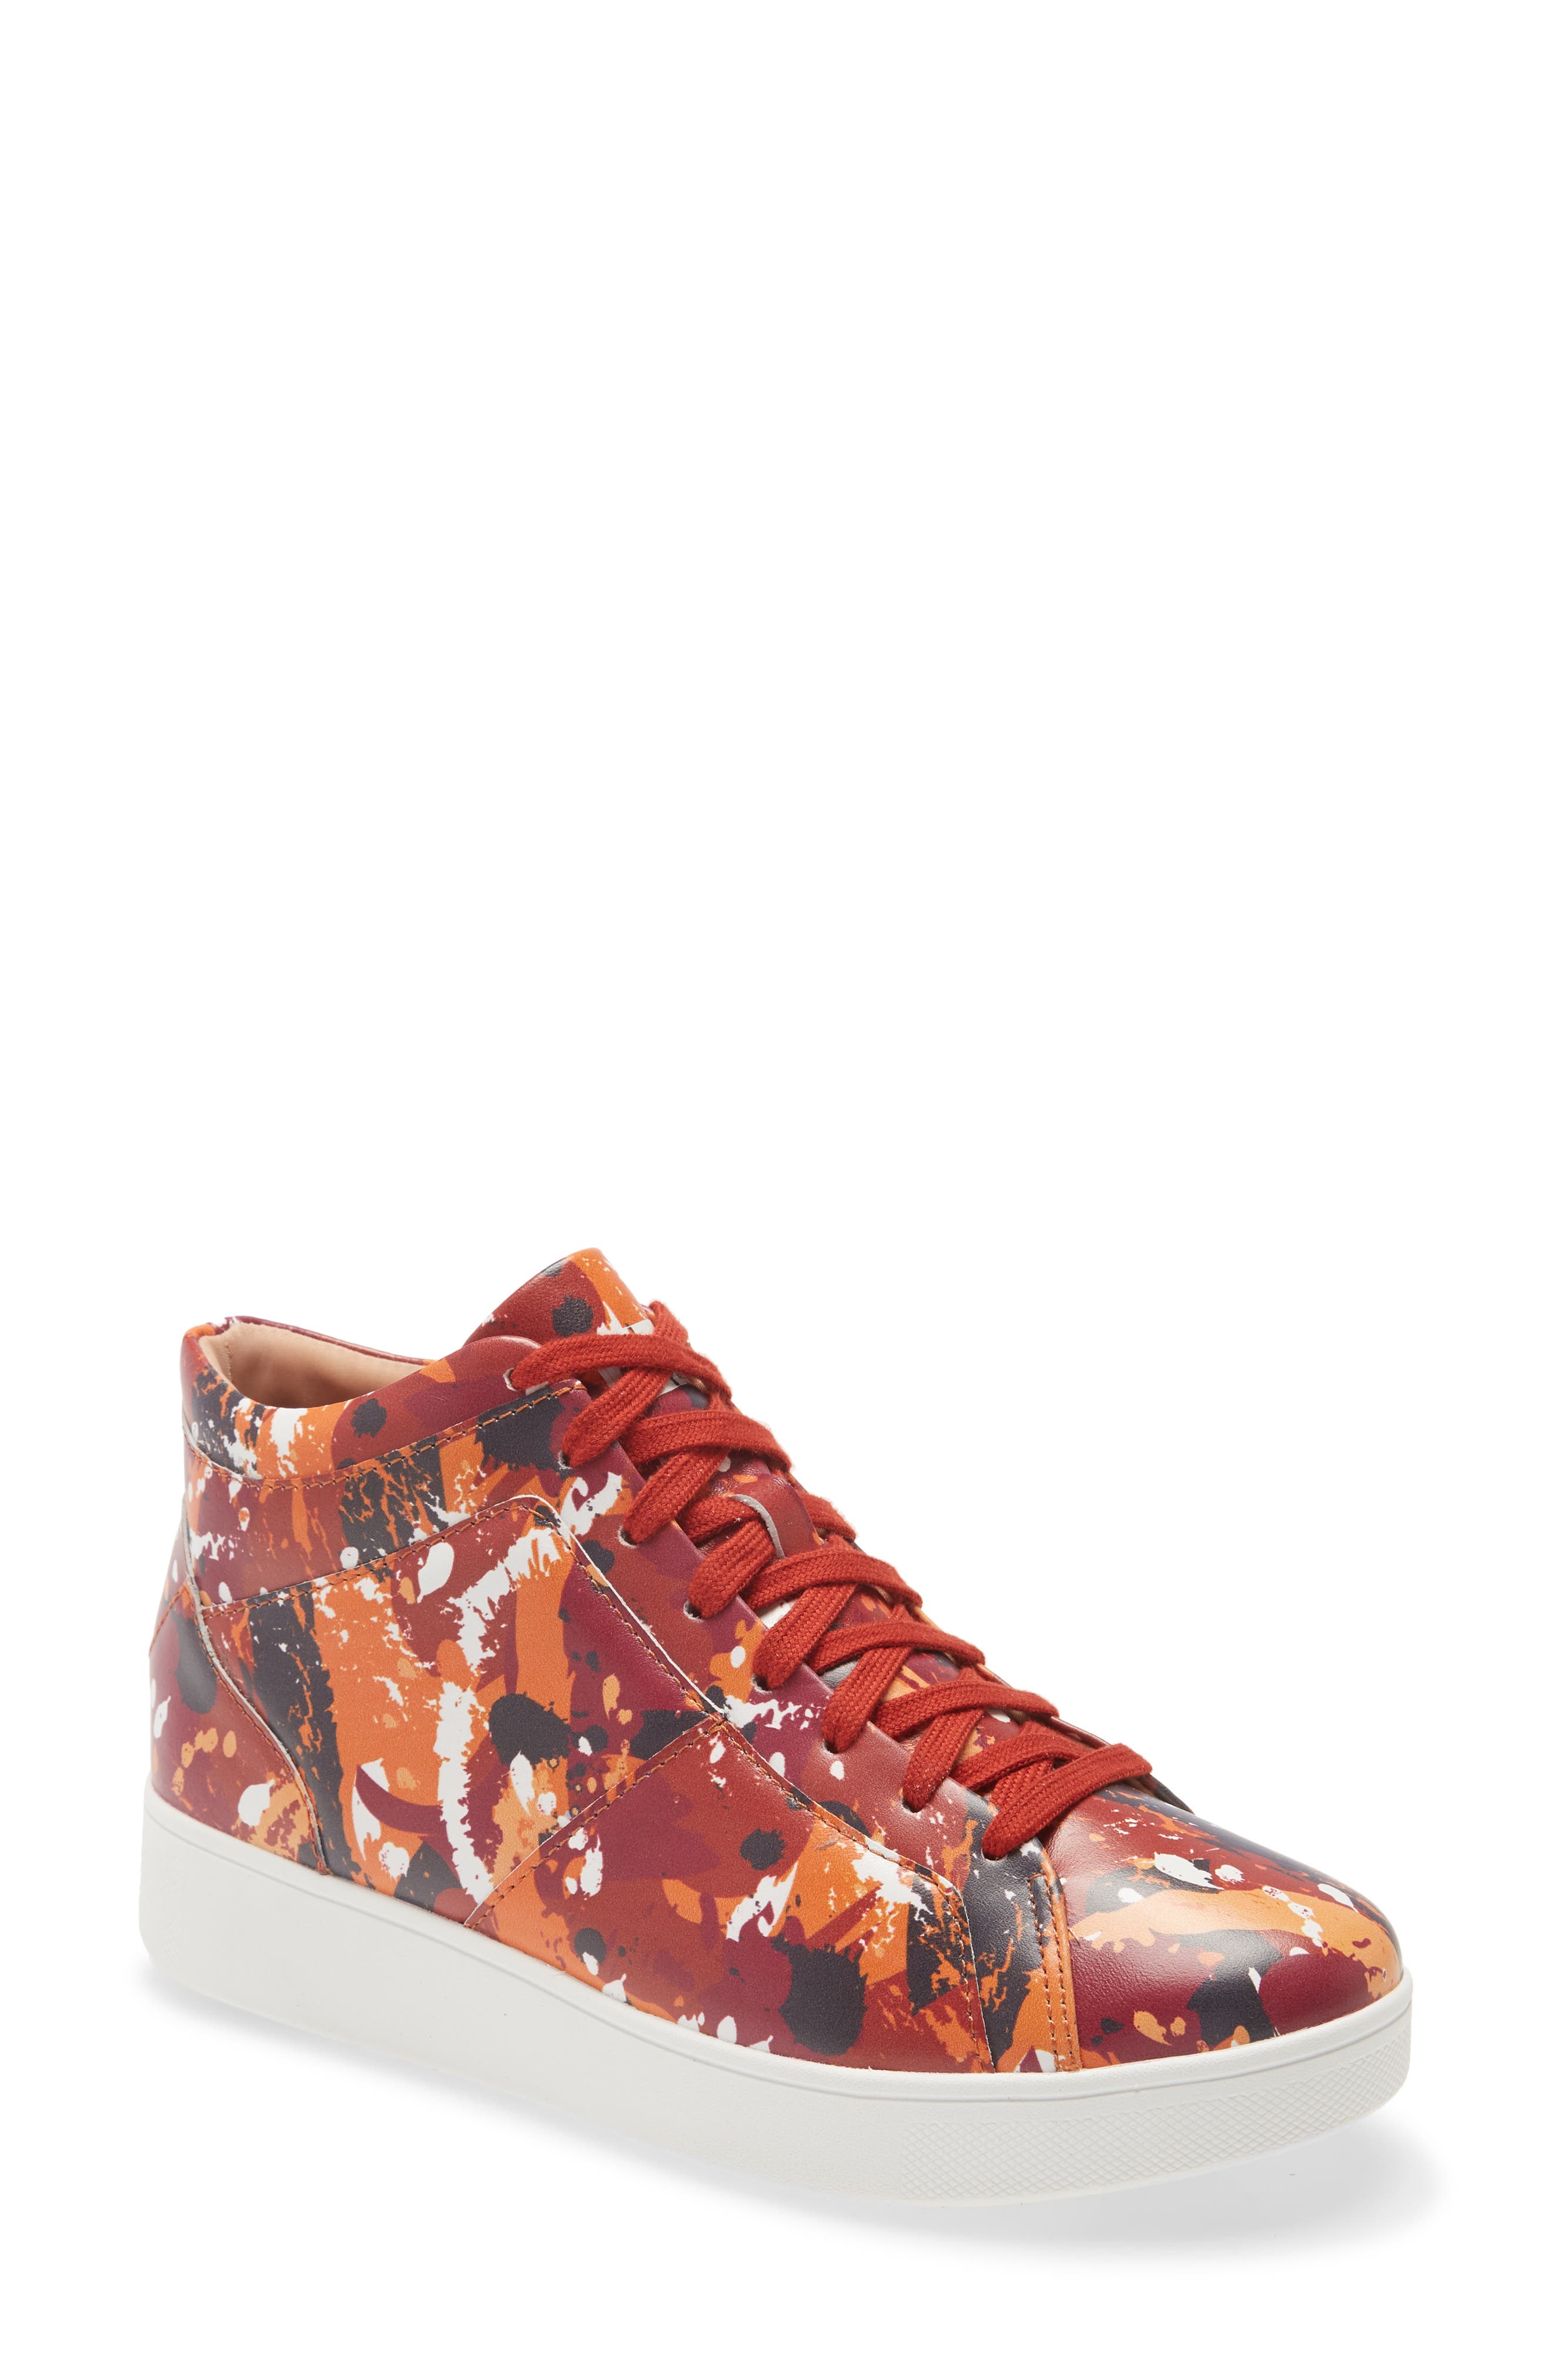 Fitflop Rally High Top Sneaker In Brick Red